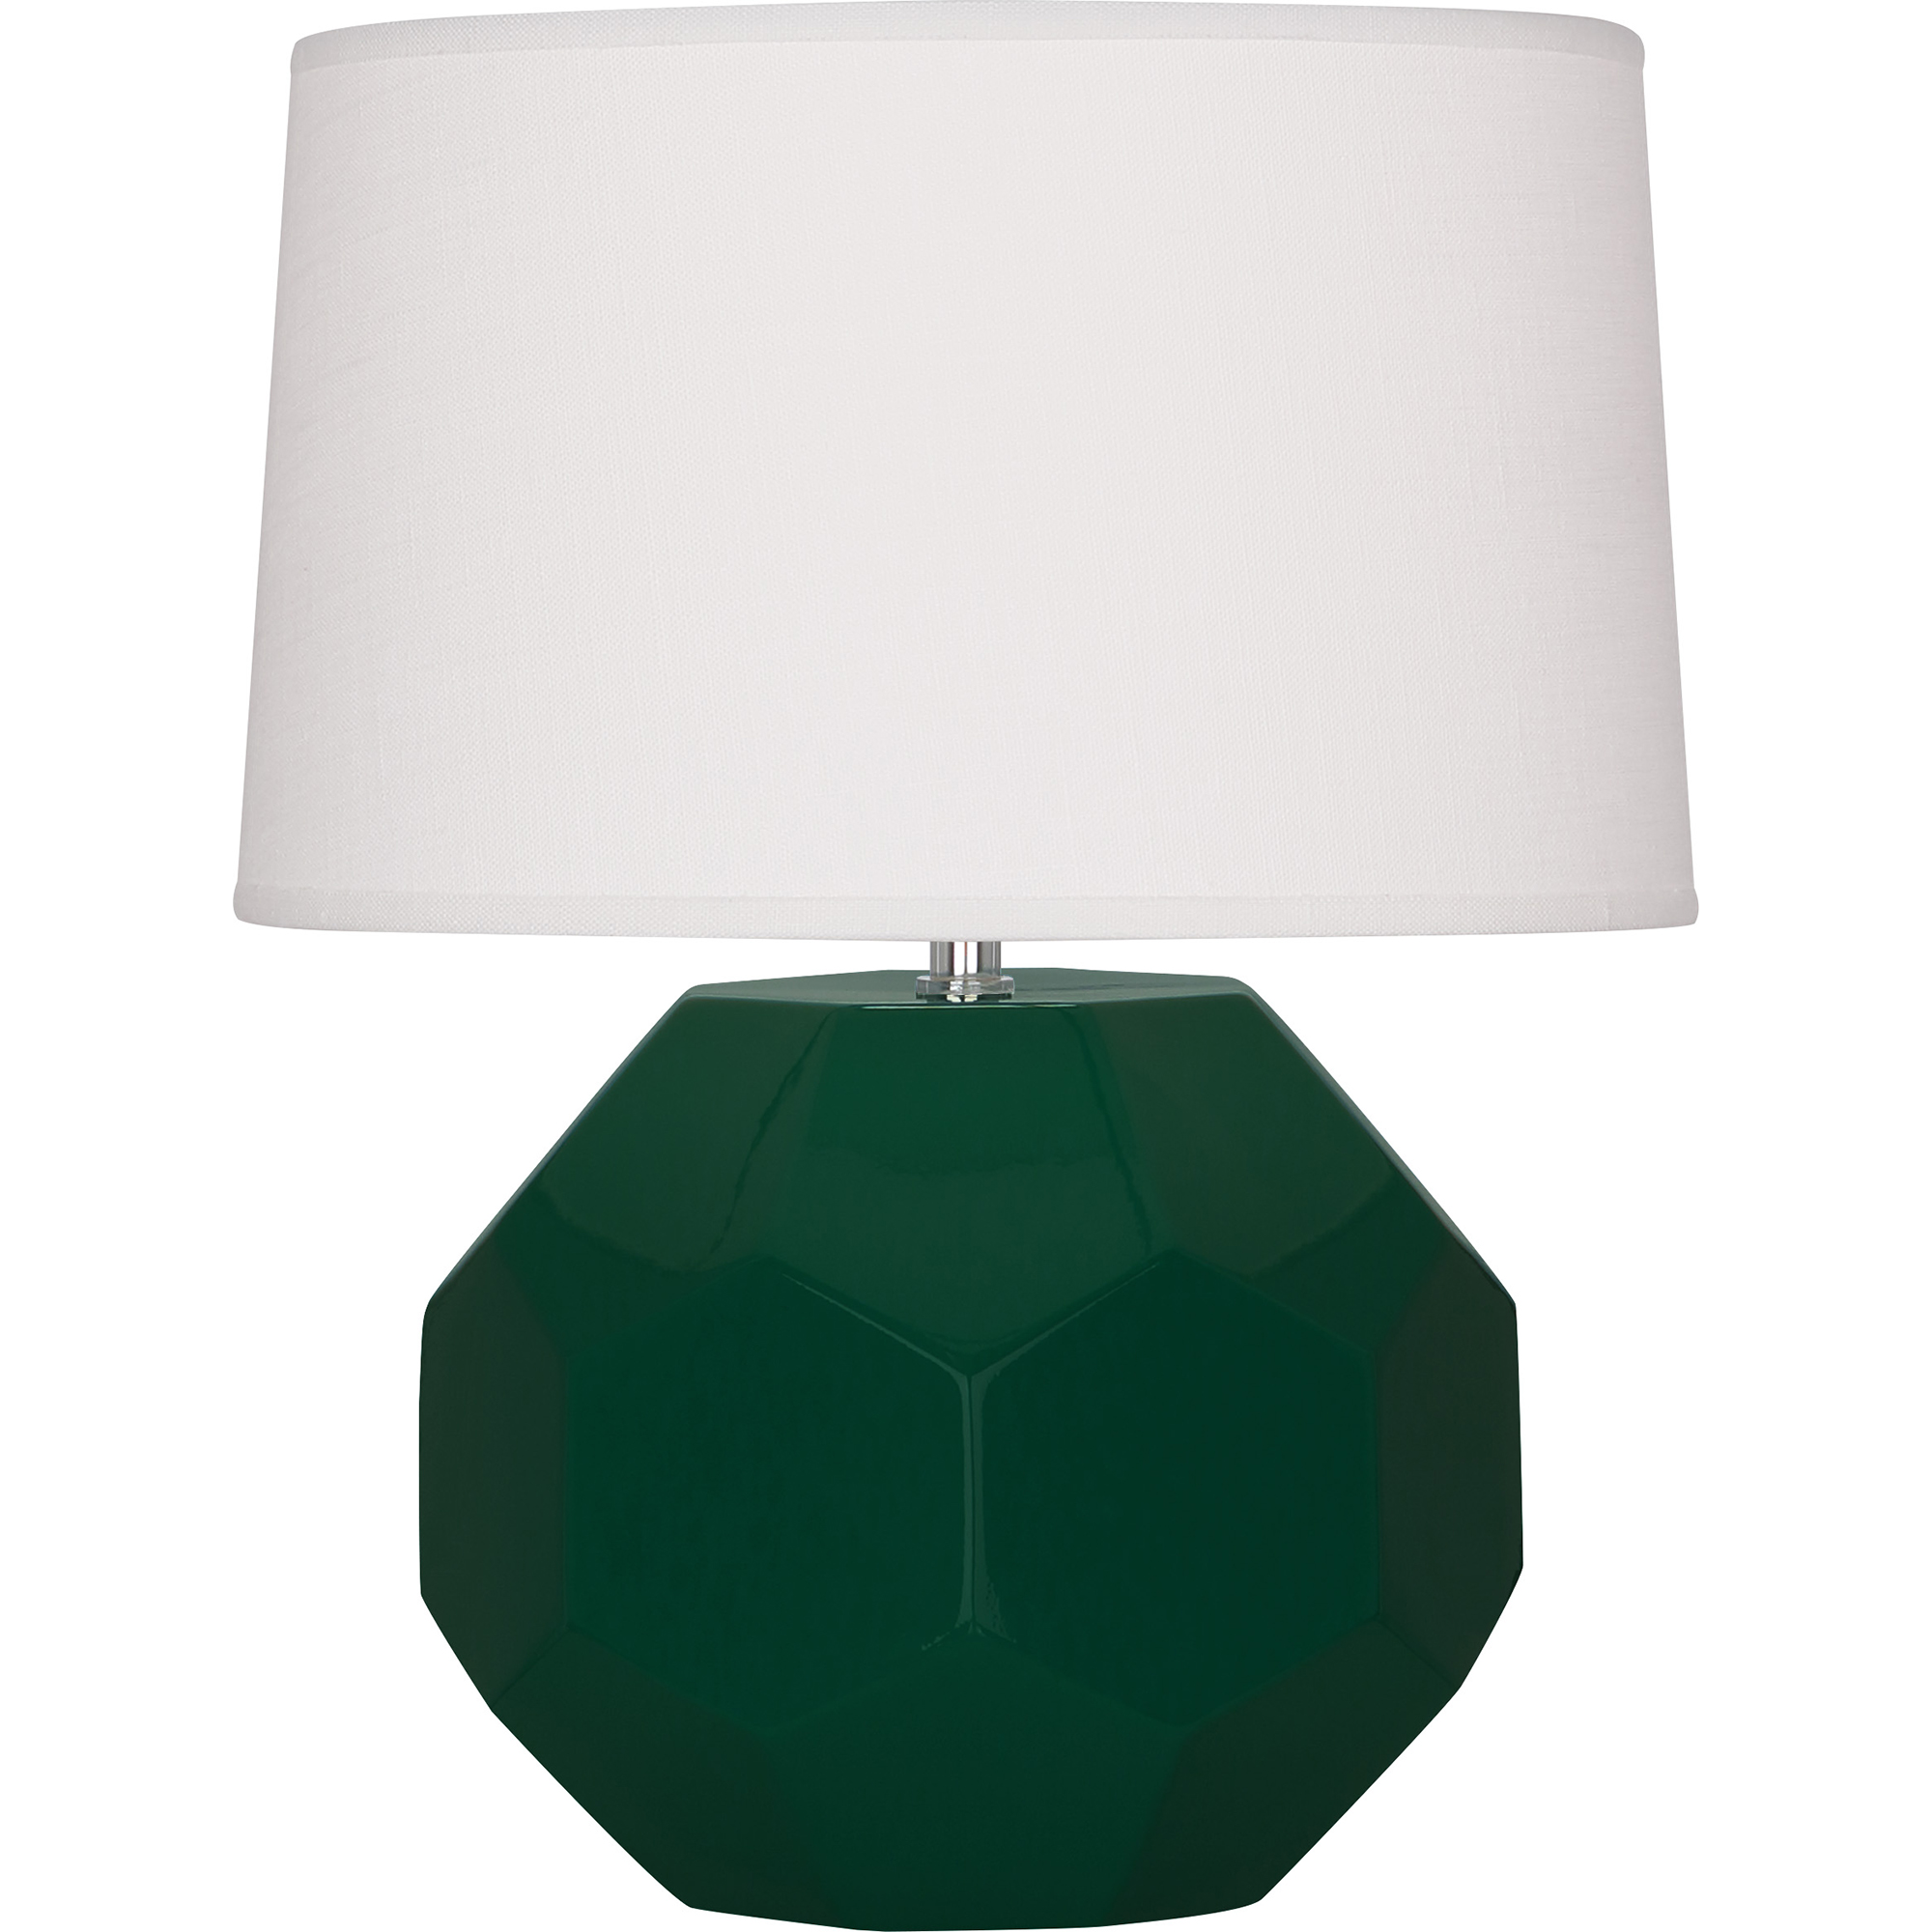 Franklin Table Lamp Style #JU01